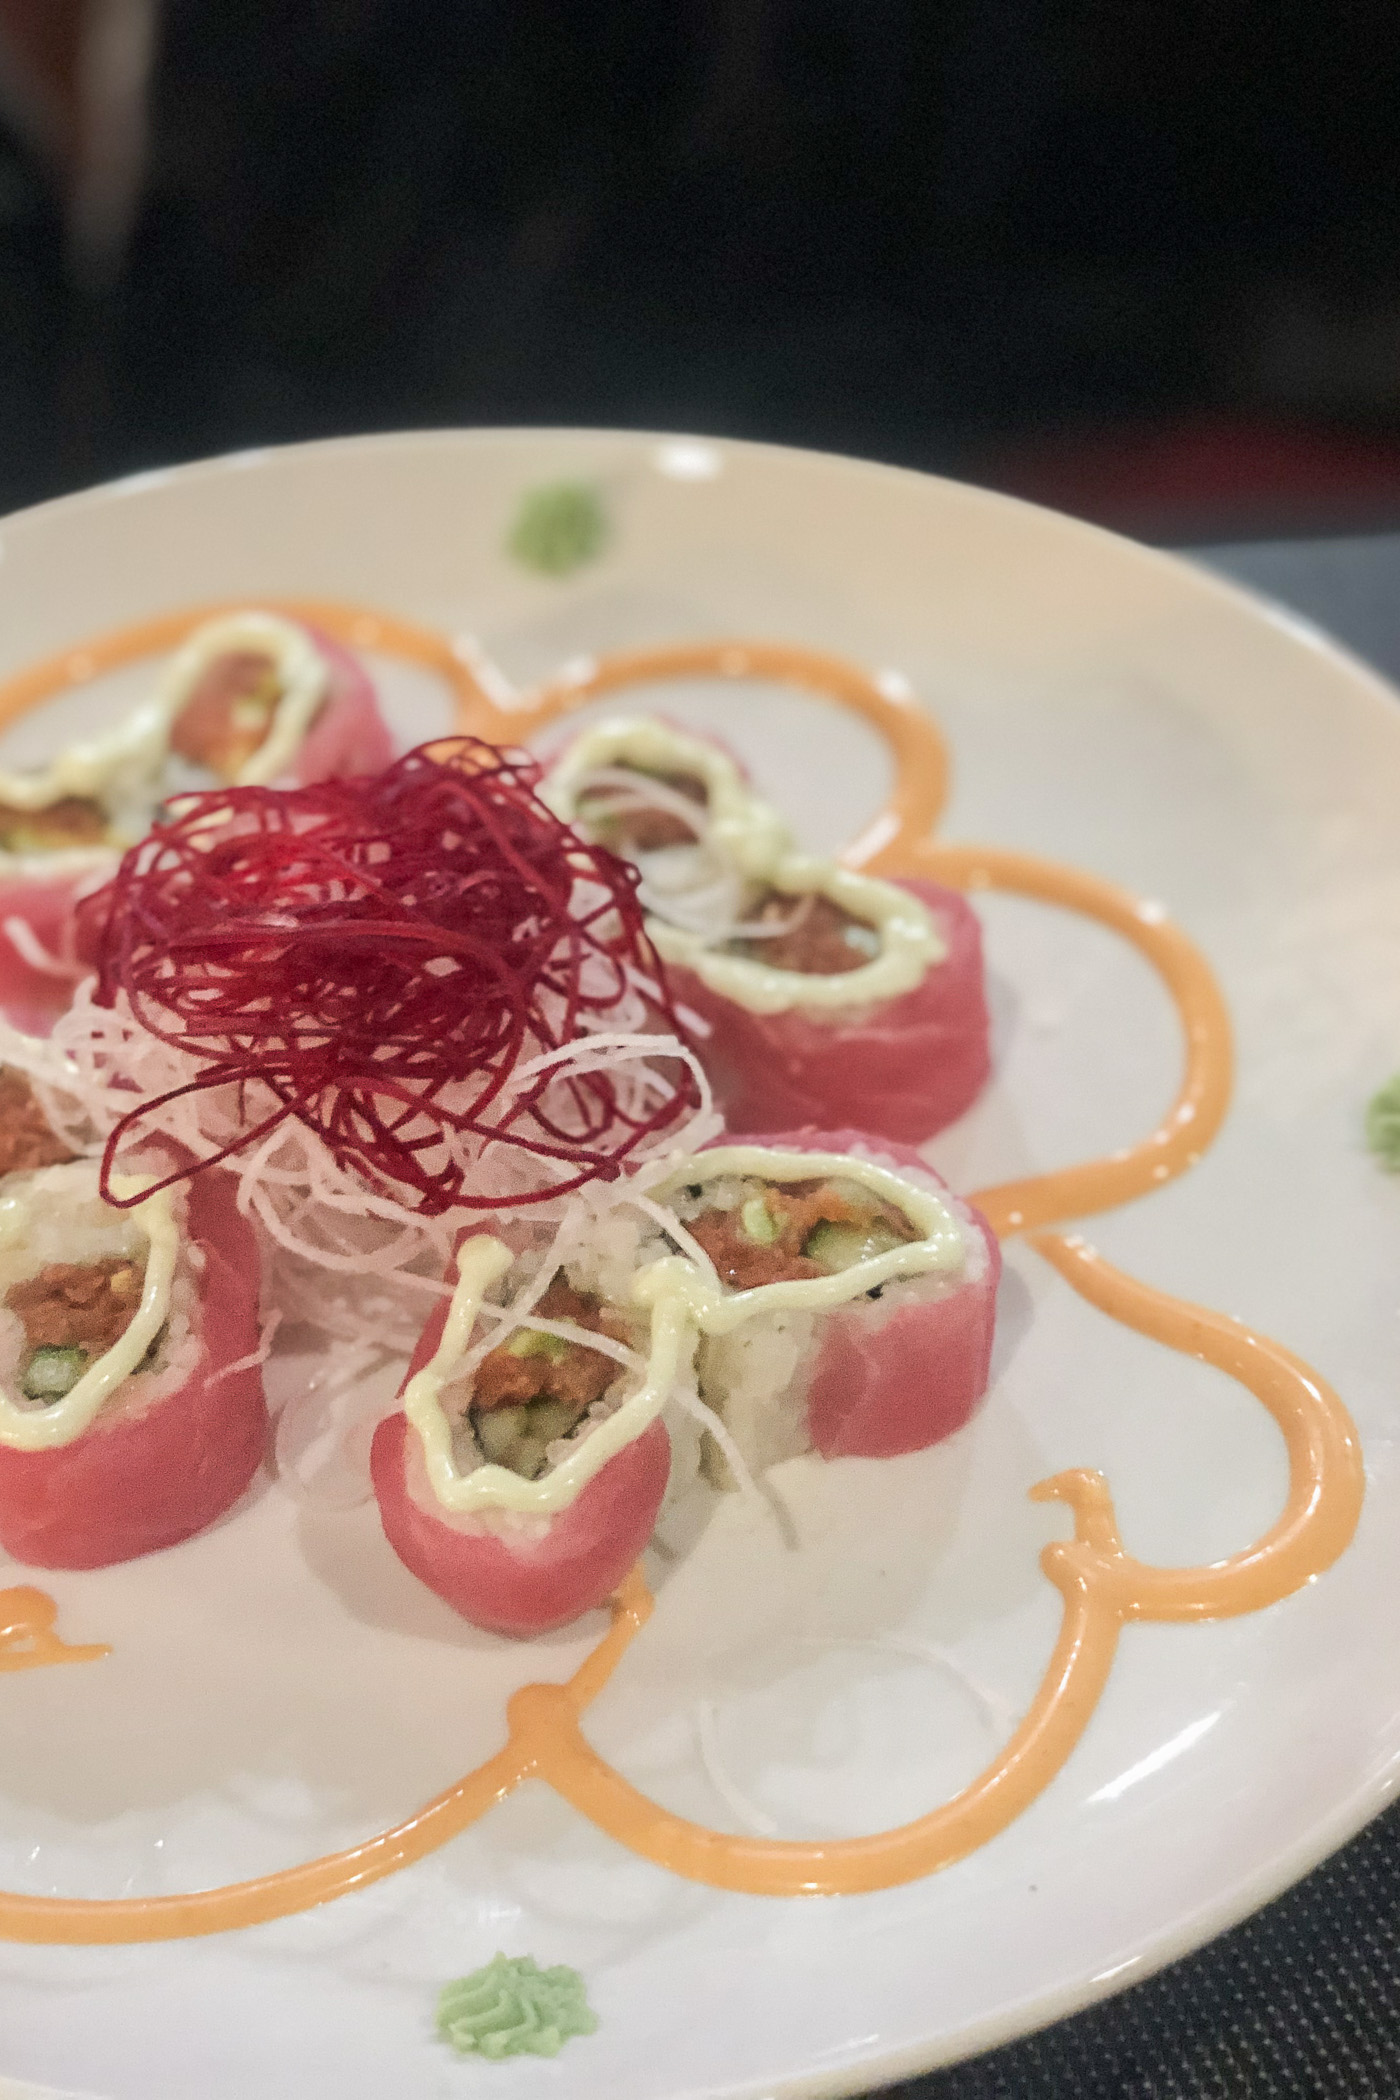 Where to eat in Greater Palm Springs - Domo Sushi